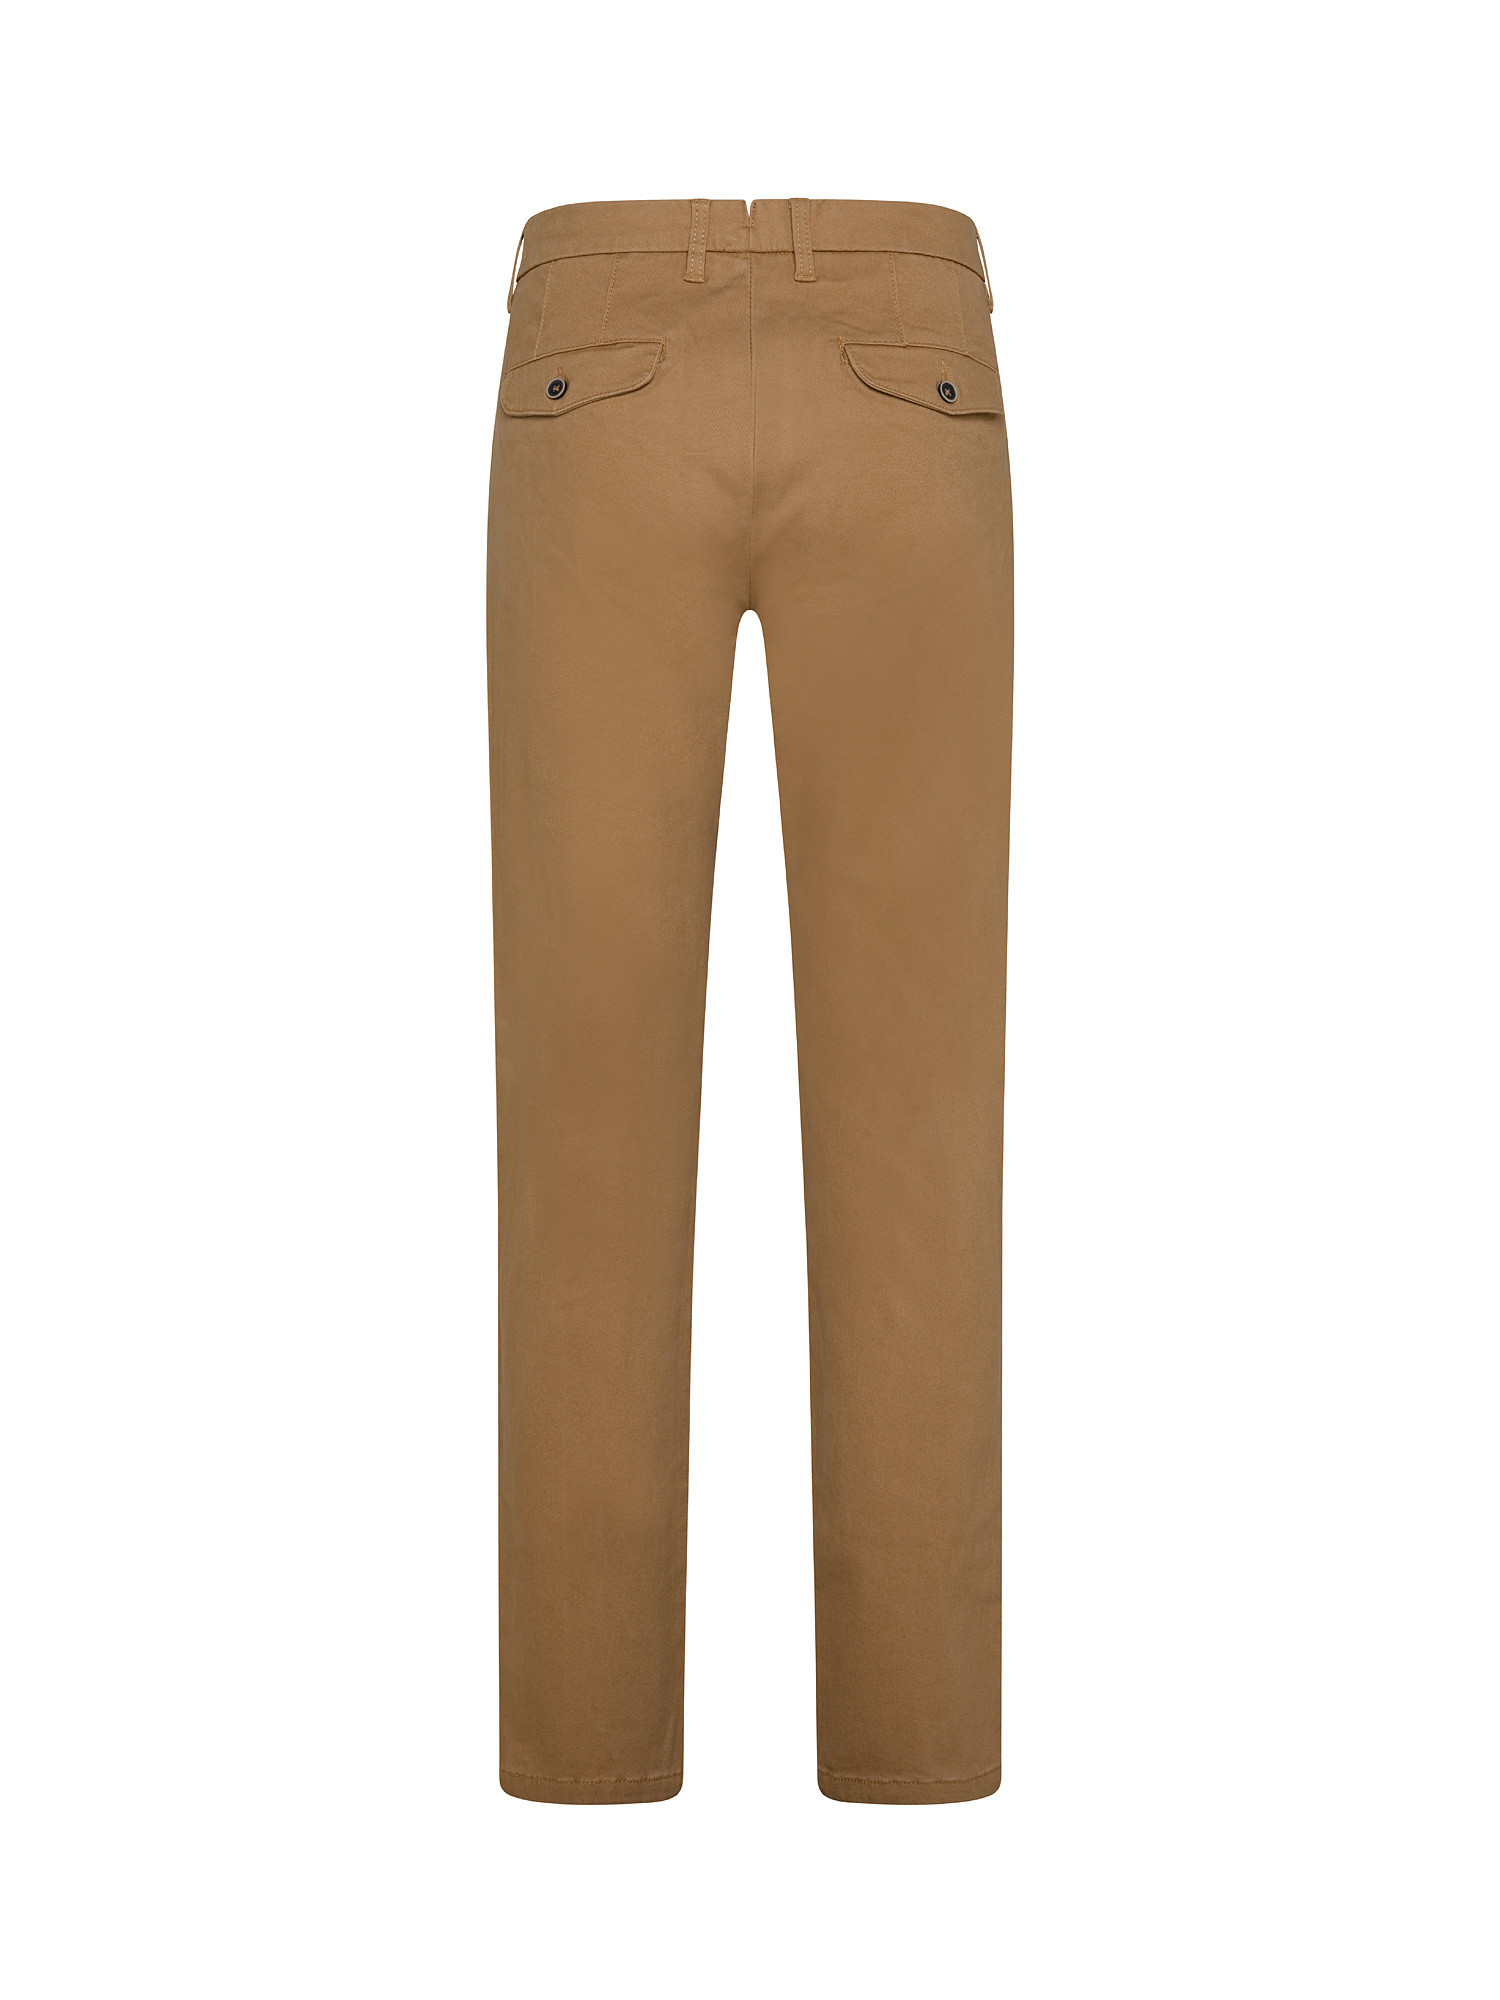 Chino trousers, Light Brown, large image number 1